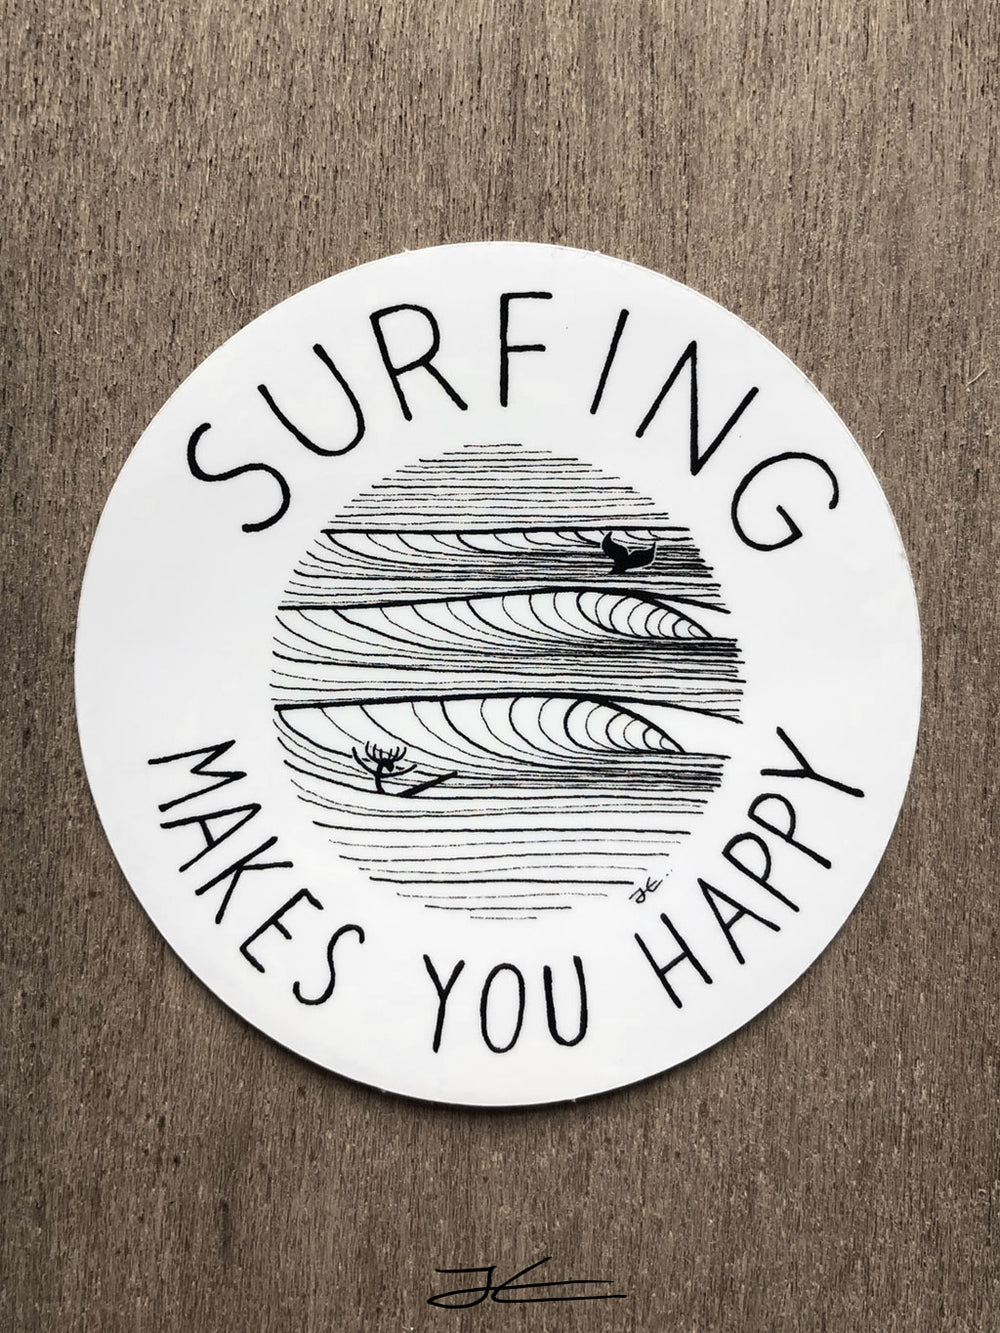 Surfing Makes You Happy Sticker (4 Stickers)